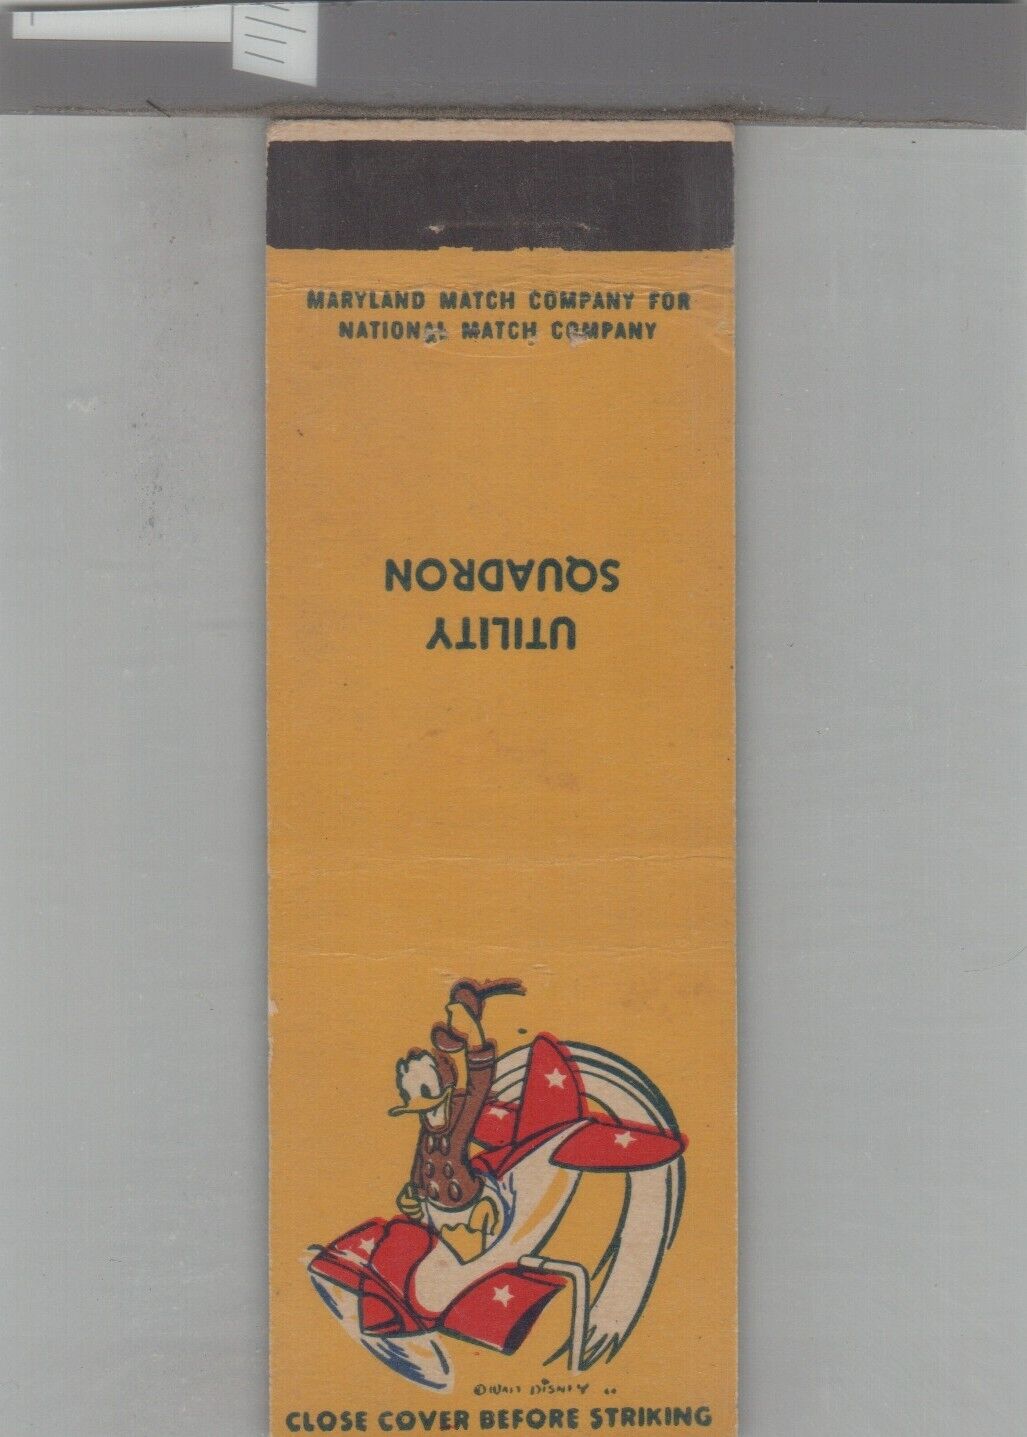 Matchbook Cover WWII Era Disney / US Army Yellow Utility Squadron